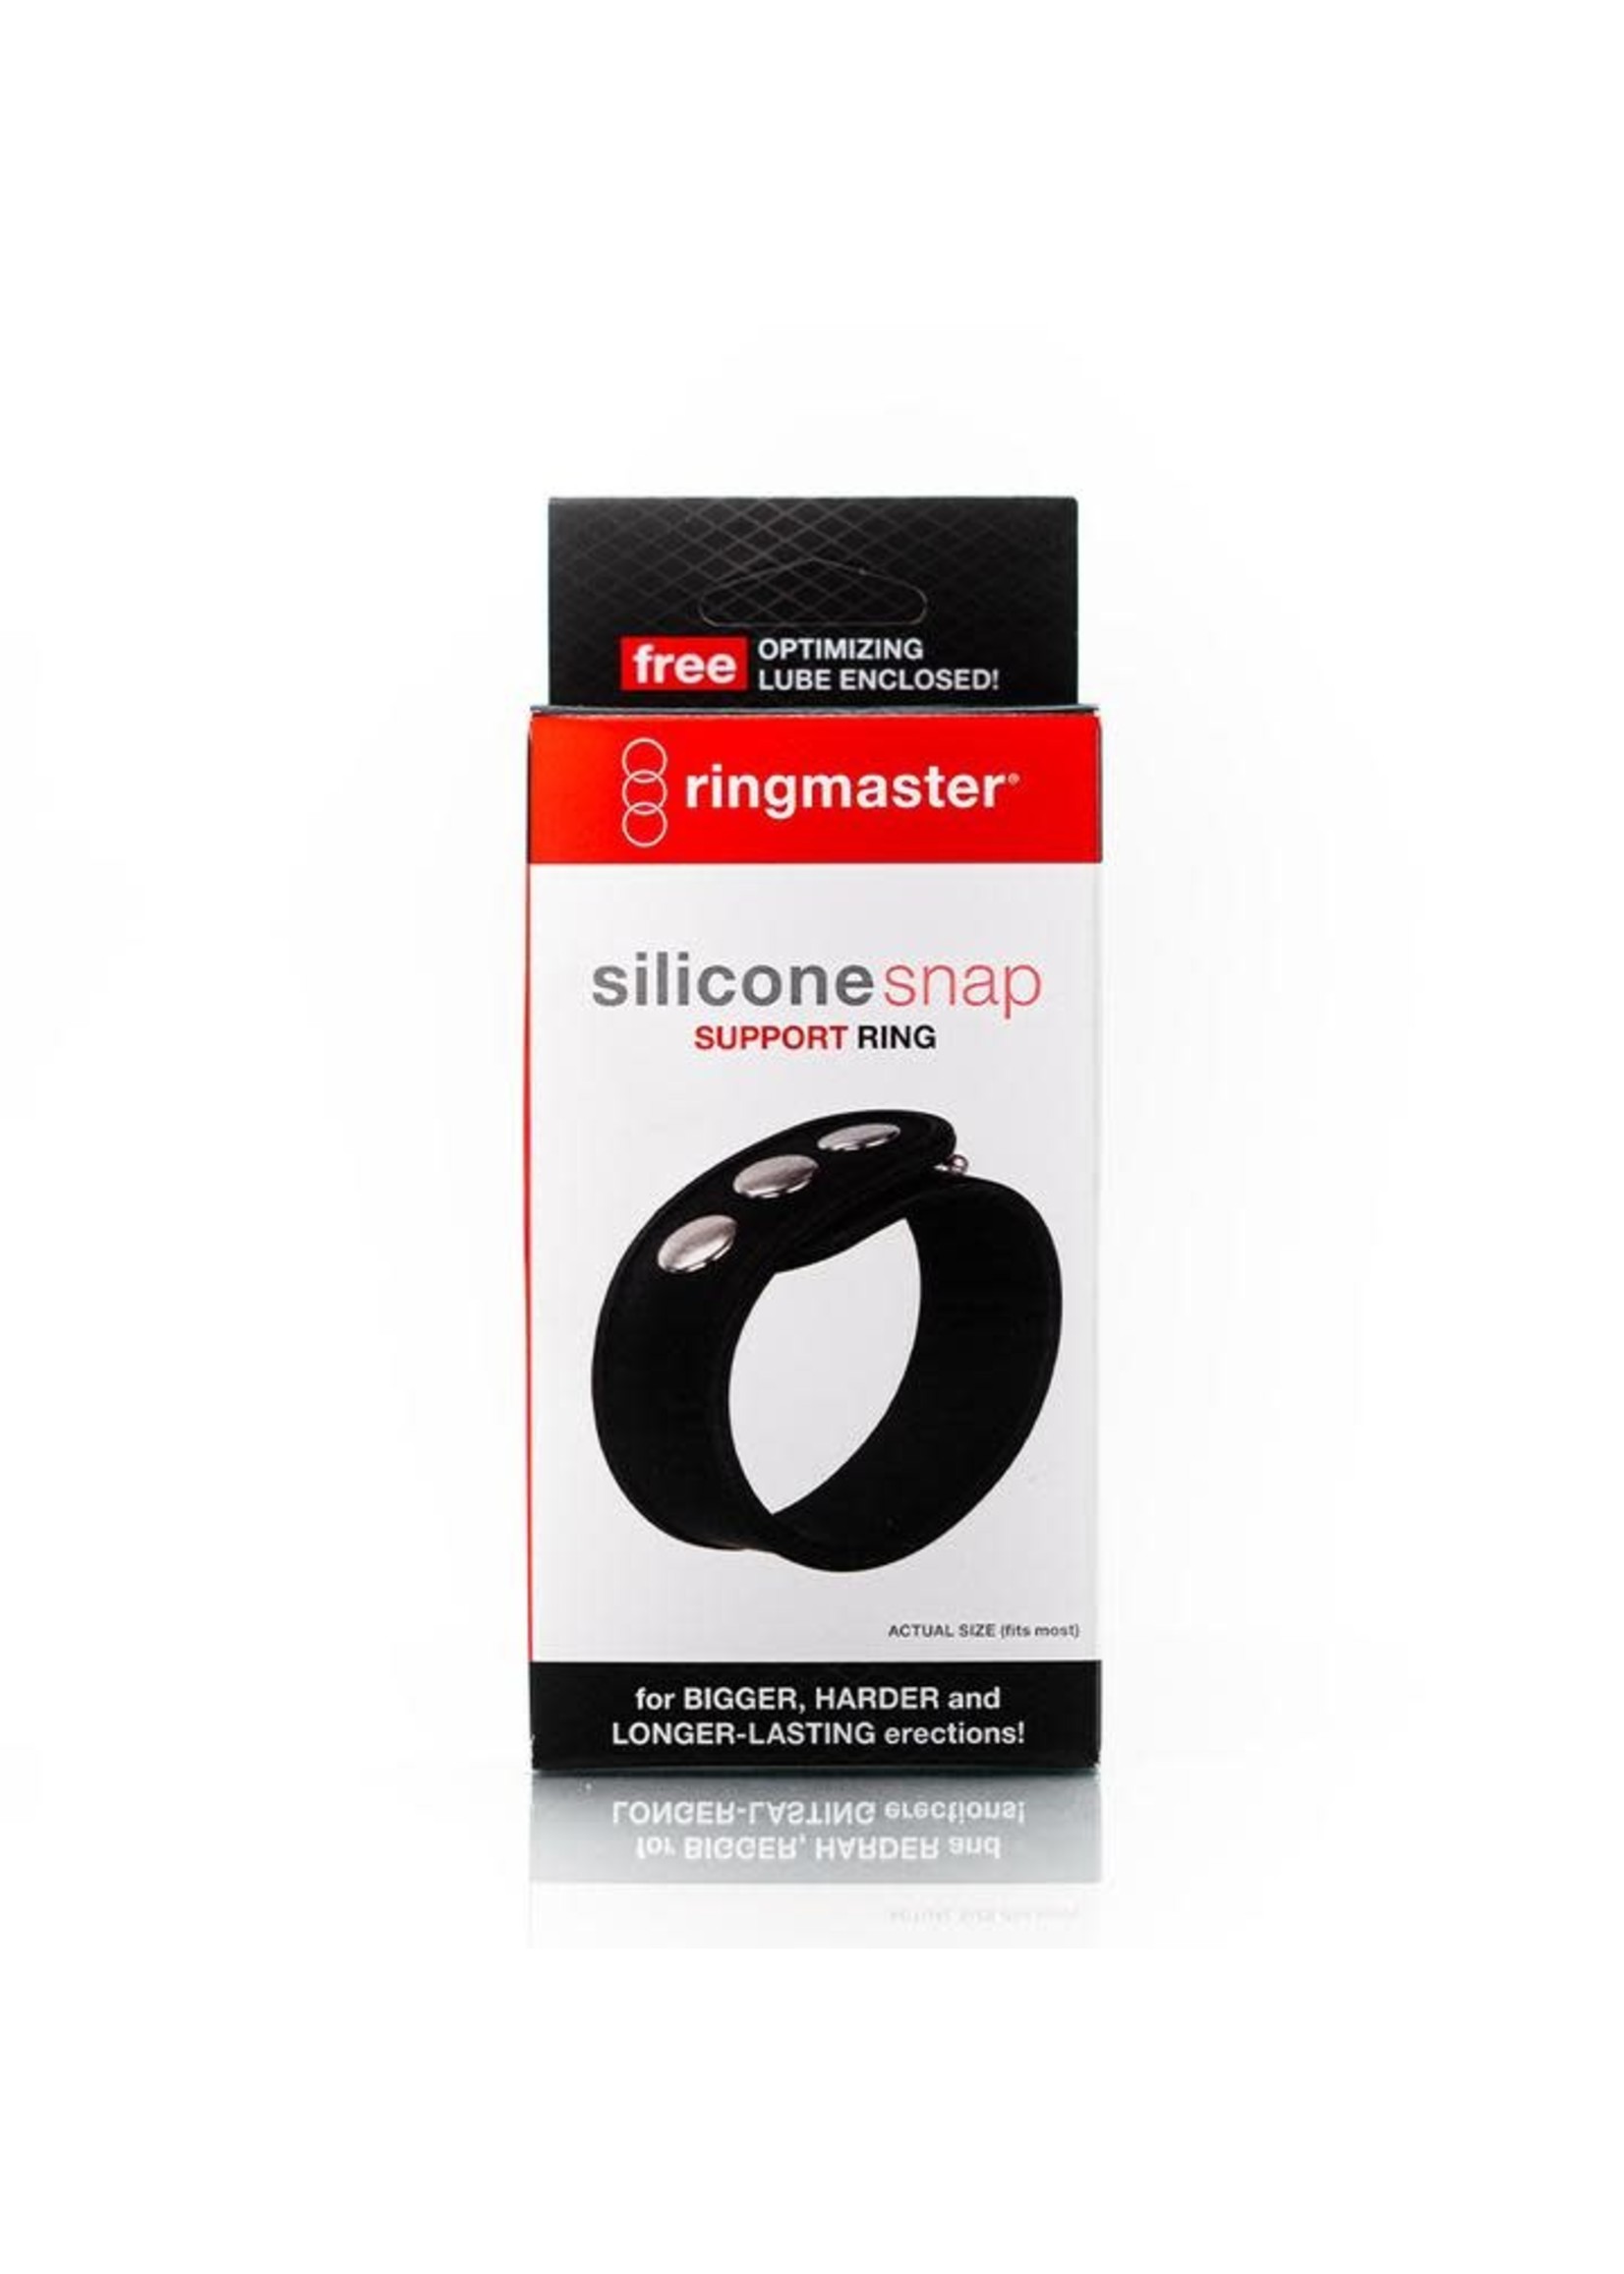 Ringmaster Silicone Snap Support Ring